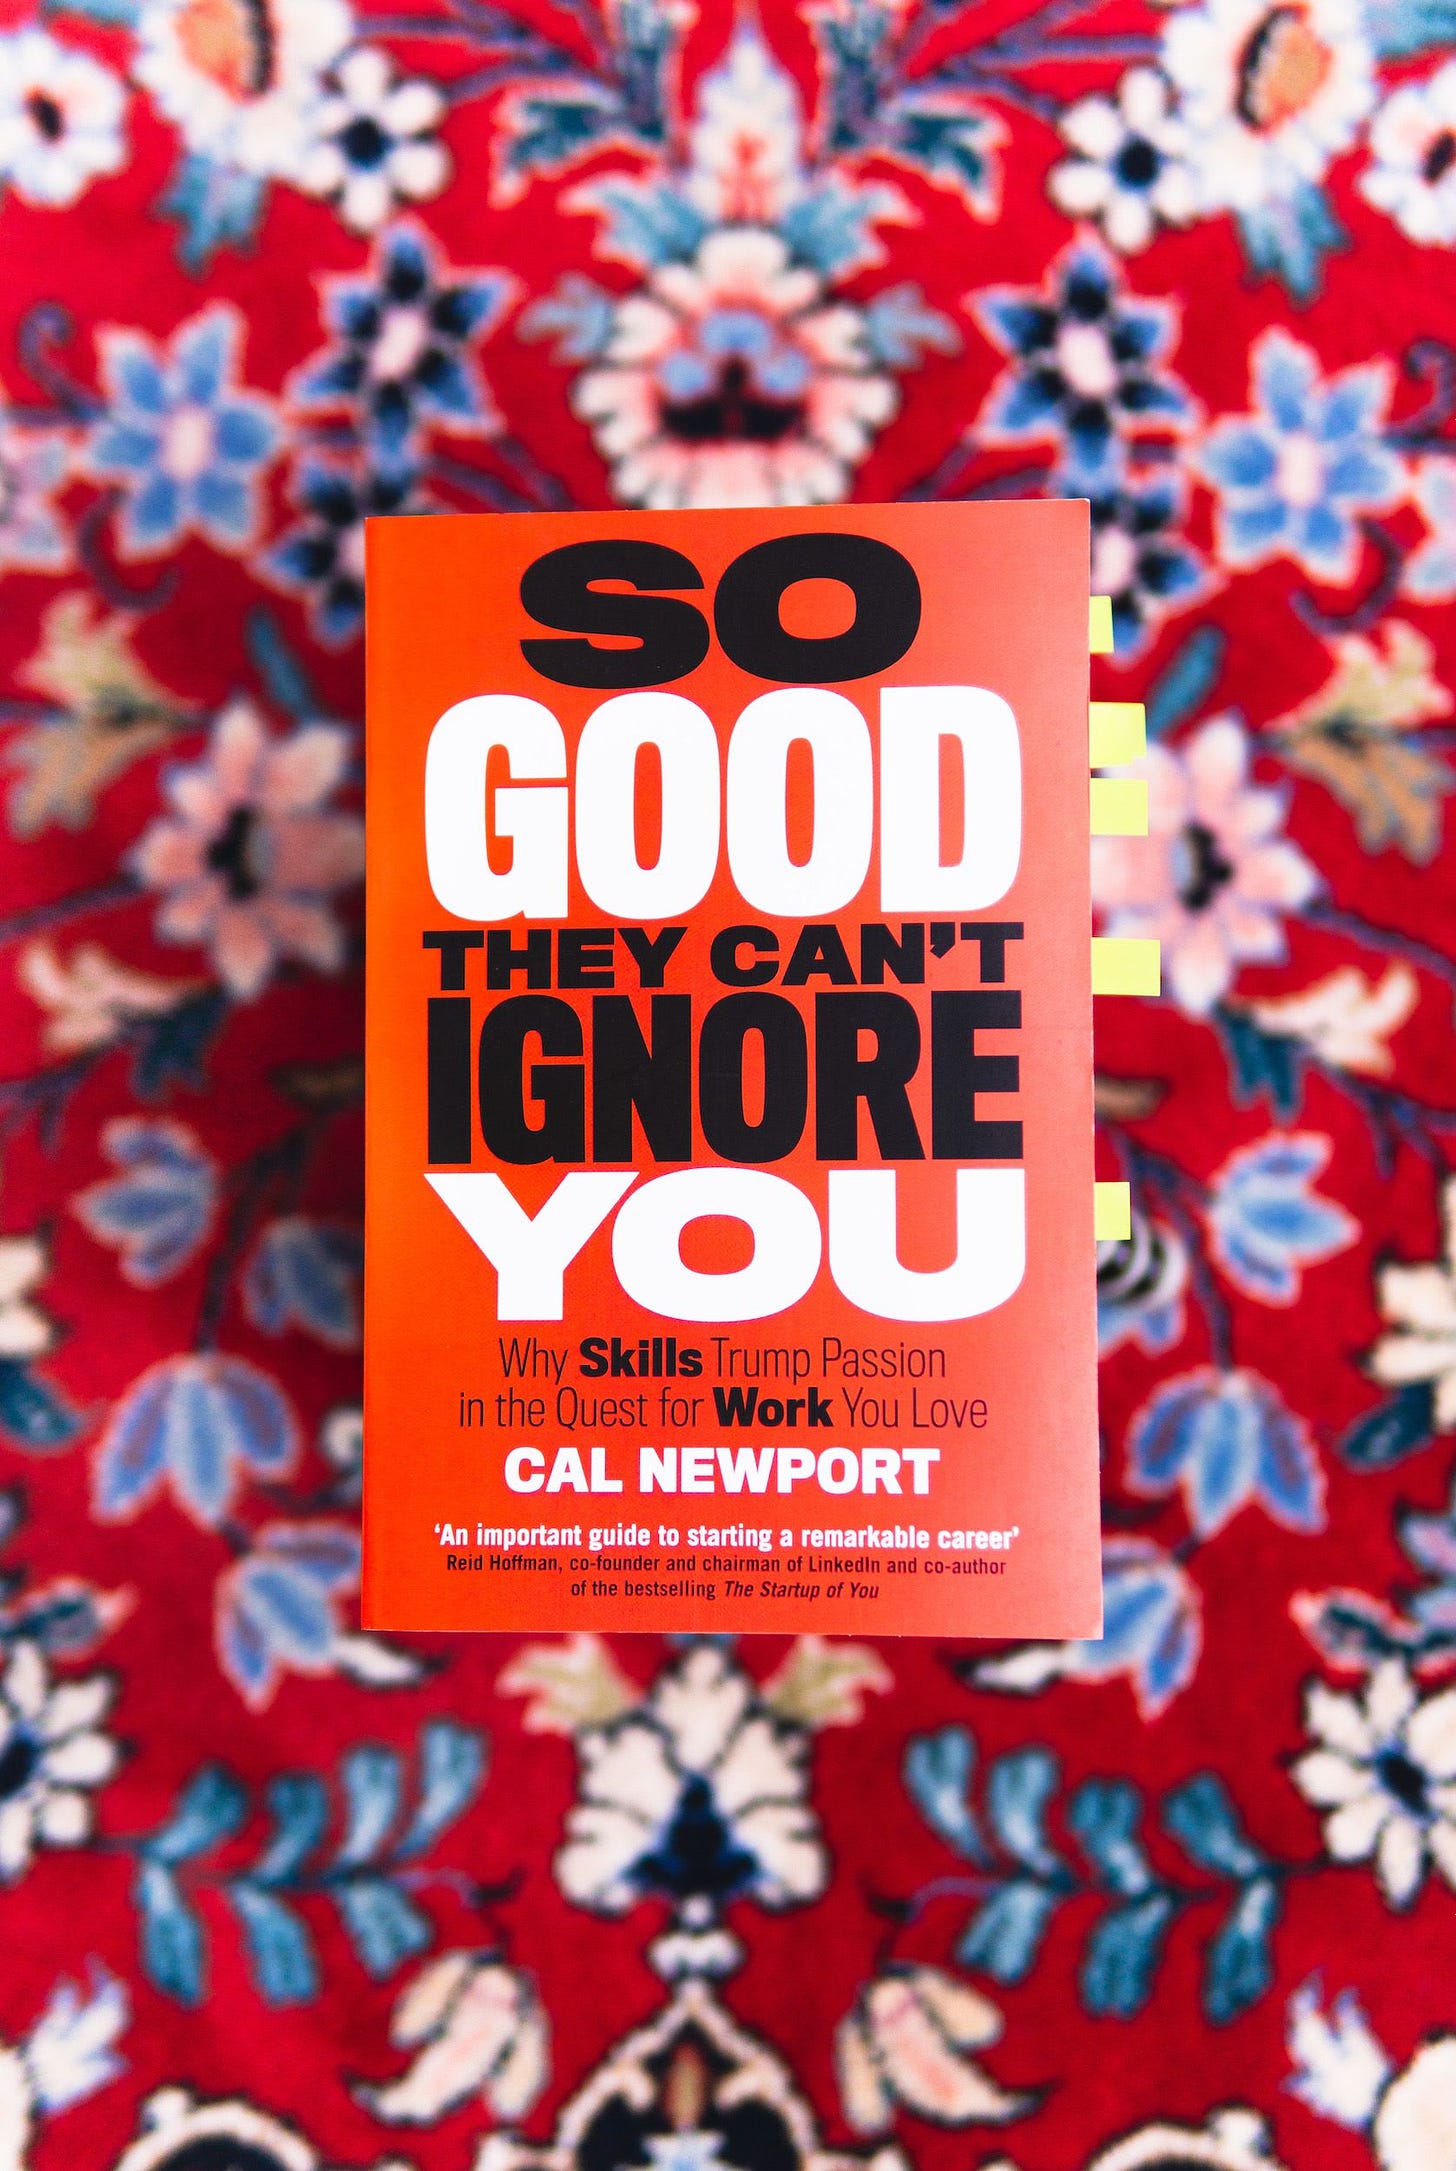 Cal Newport - "So Good They Can't Ignore You"  - QuickSummary